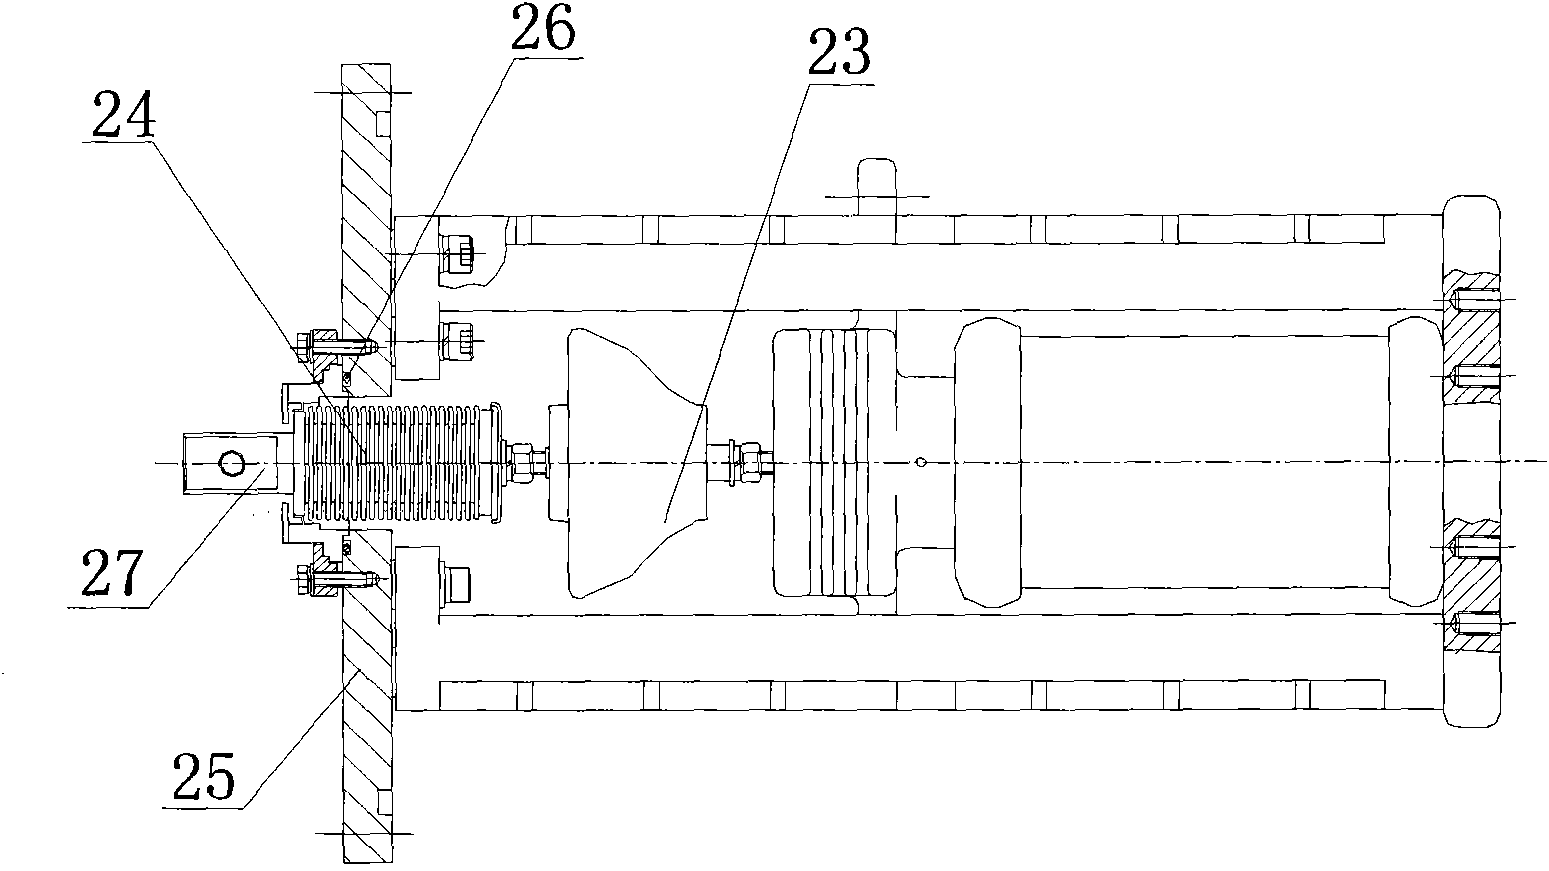 Box-sharing gas-insulated metal enclosed switching device